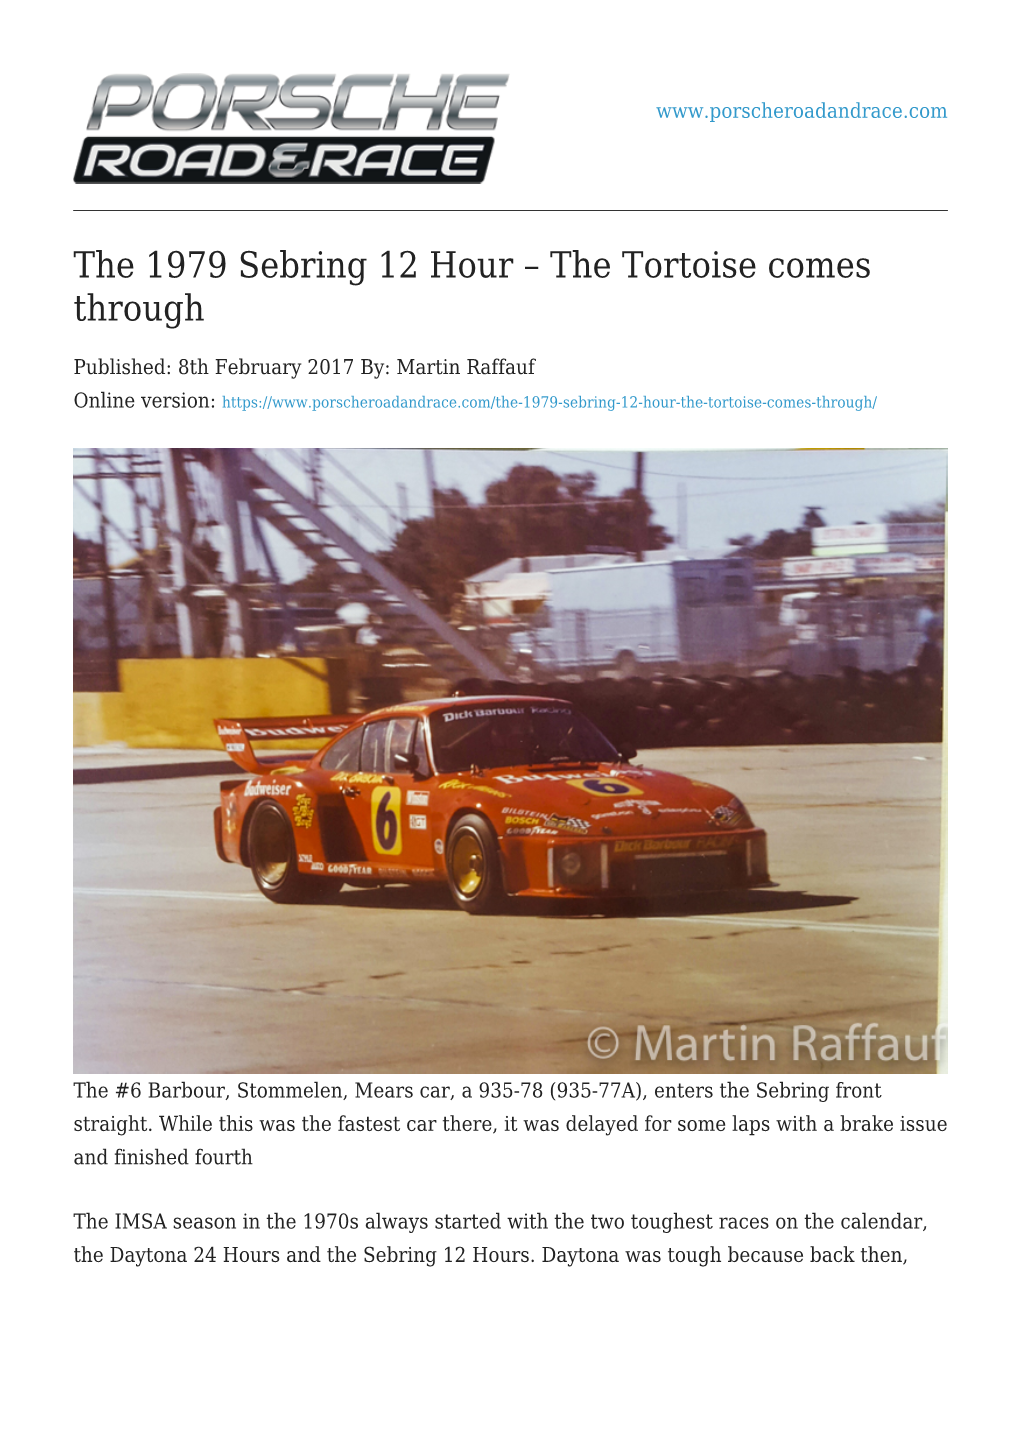 The 1979 Sebring 12 Hour – the Tortoise Comes Through